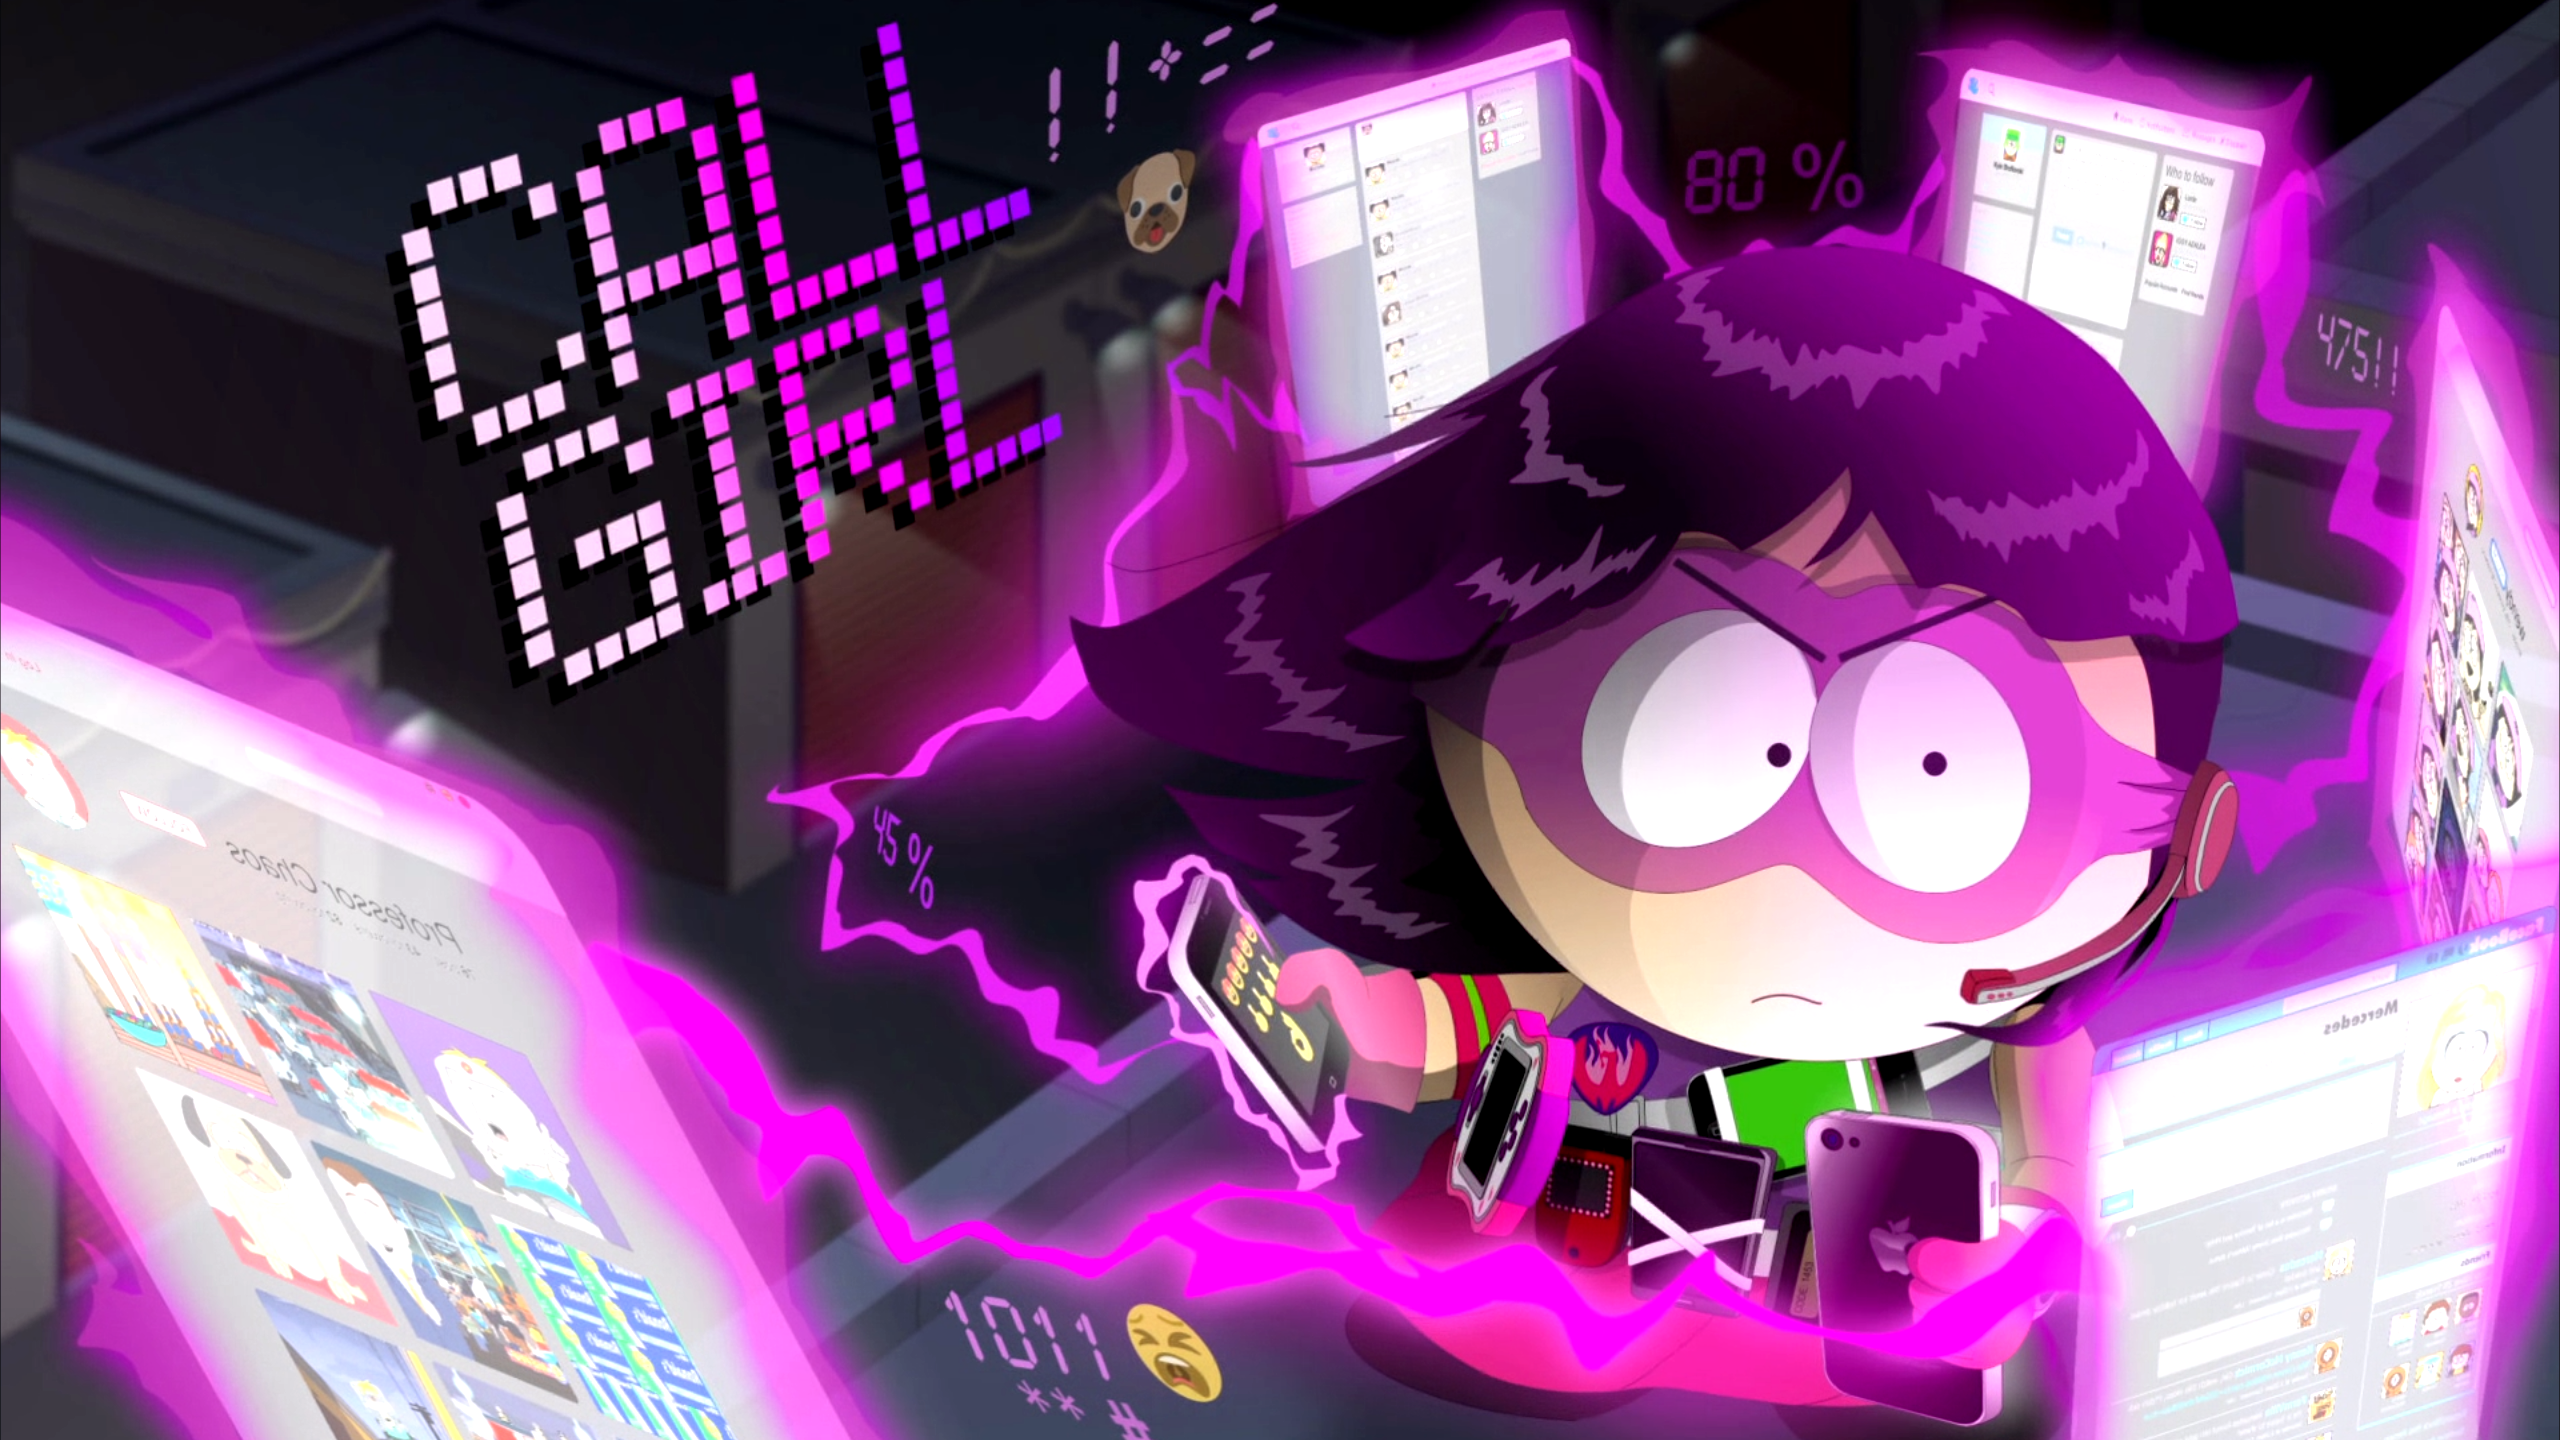 General 2560x1440 South Park: Fractured But Whole humor video games pink